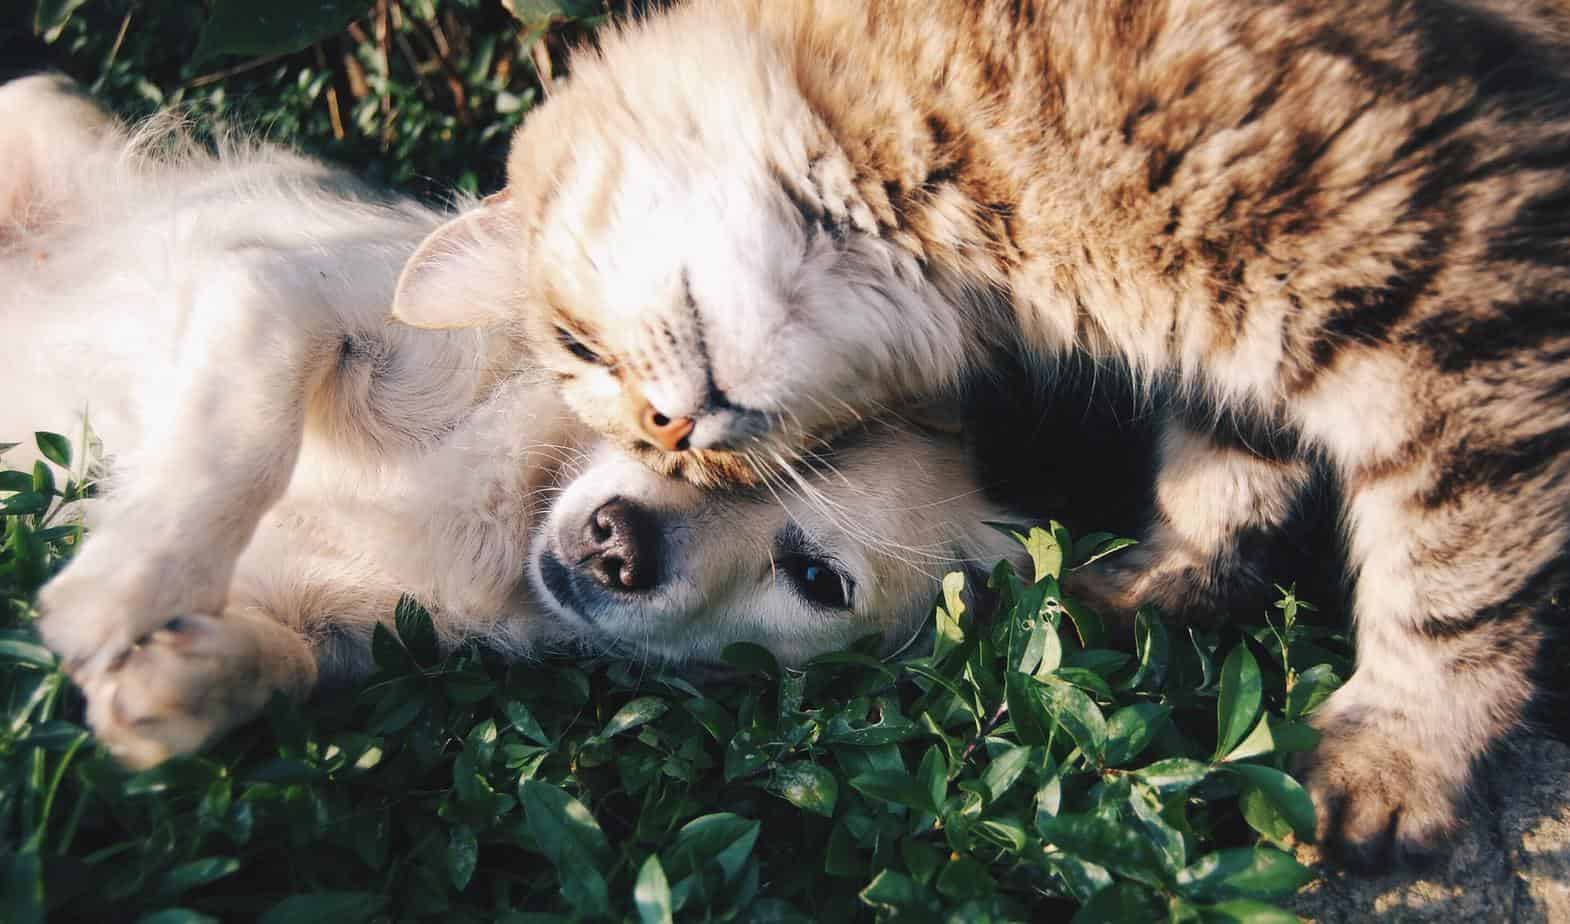 What’s useful in caring for your dog and cat?